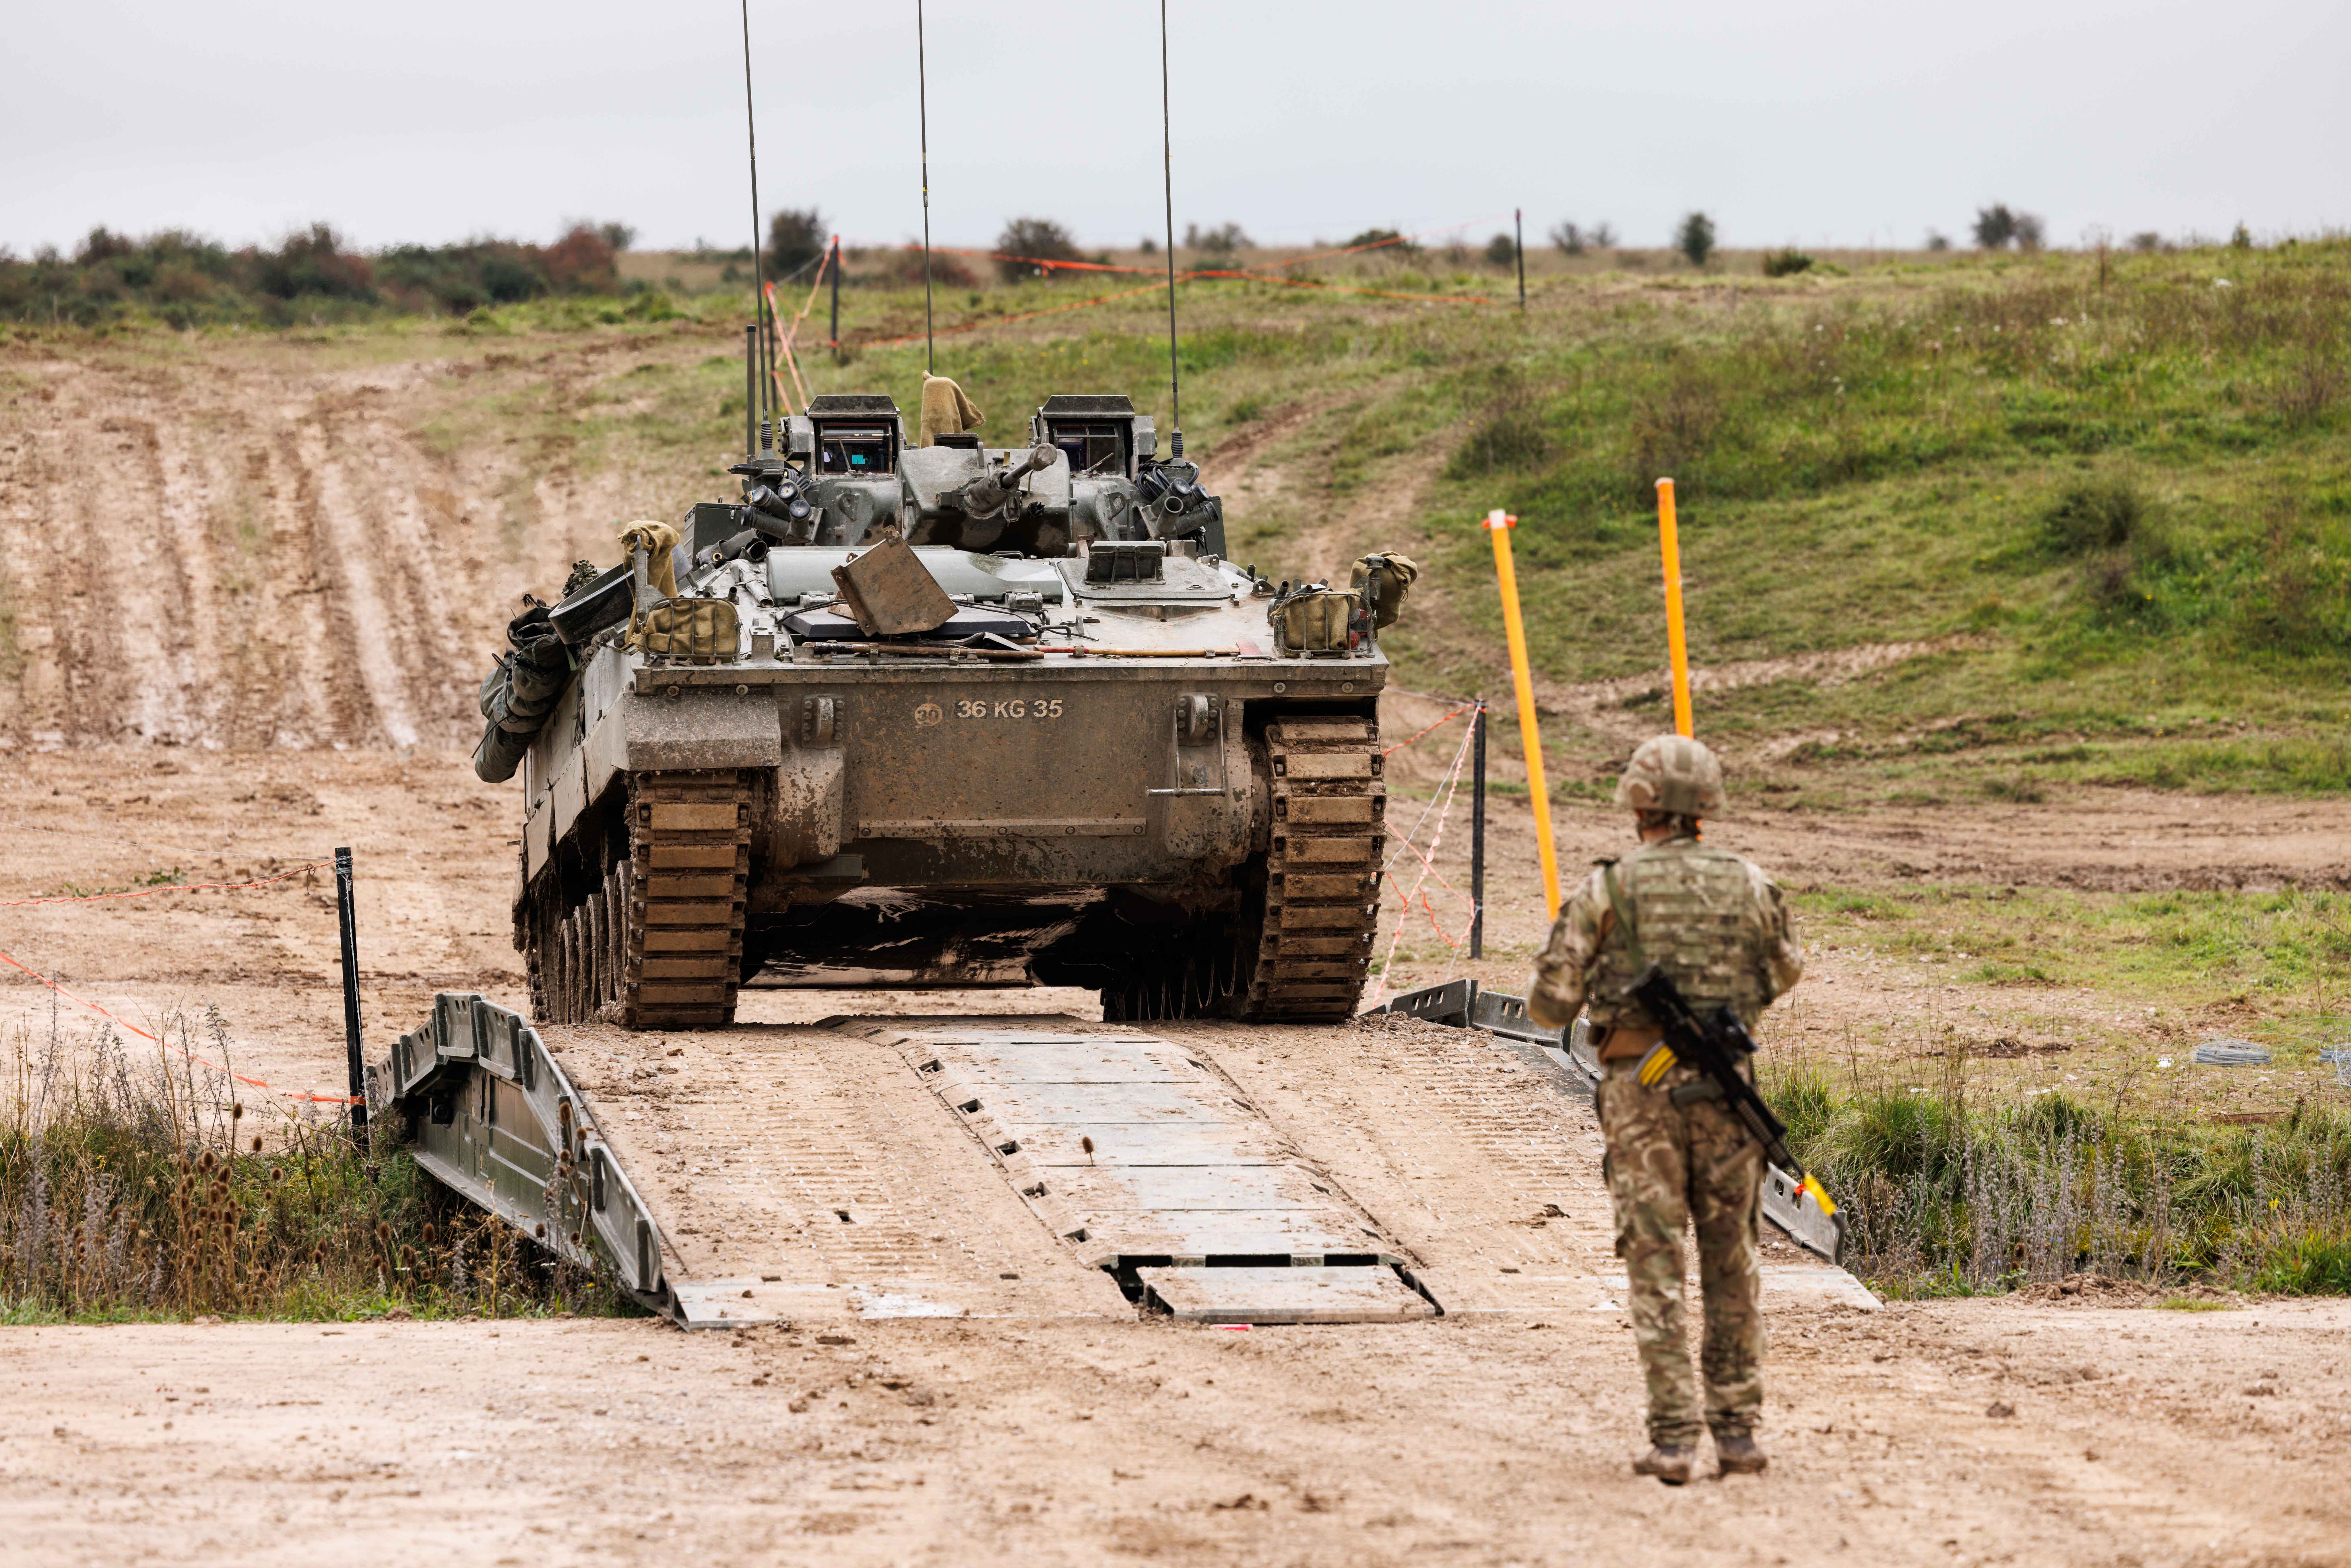 Pictured: A Warrior Infantry Fighting Vehicle is guided over a small bridge during Ex Iron Titan on Salisbury Training area near West Down camp.

Ex IRON TITAN (Ex IT23) is a scenario driven exercise that coheres the training of the 3(UK) Divisions enabling elements.

Ex IRON DIABOLO, a sub-exercise within Ex IT23 will validate 21 Engineer Regiment as the Divisional Engineer Regiment and 26 Engineer Regiment ahead of their deployment to Poland on Op LINOTYPER in early 2024.

The exercise targets technical engineering, with a focus on those tasks which are difficult to deliver at the Battlegroup FTX level such as: Wet Wide Gap Crossing (WWGC) part of the Battle Craft Syllabus (BCT), Amphibious and Boat operations as well as construction of other facilities.